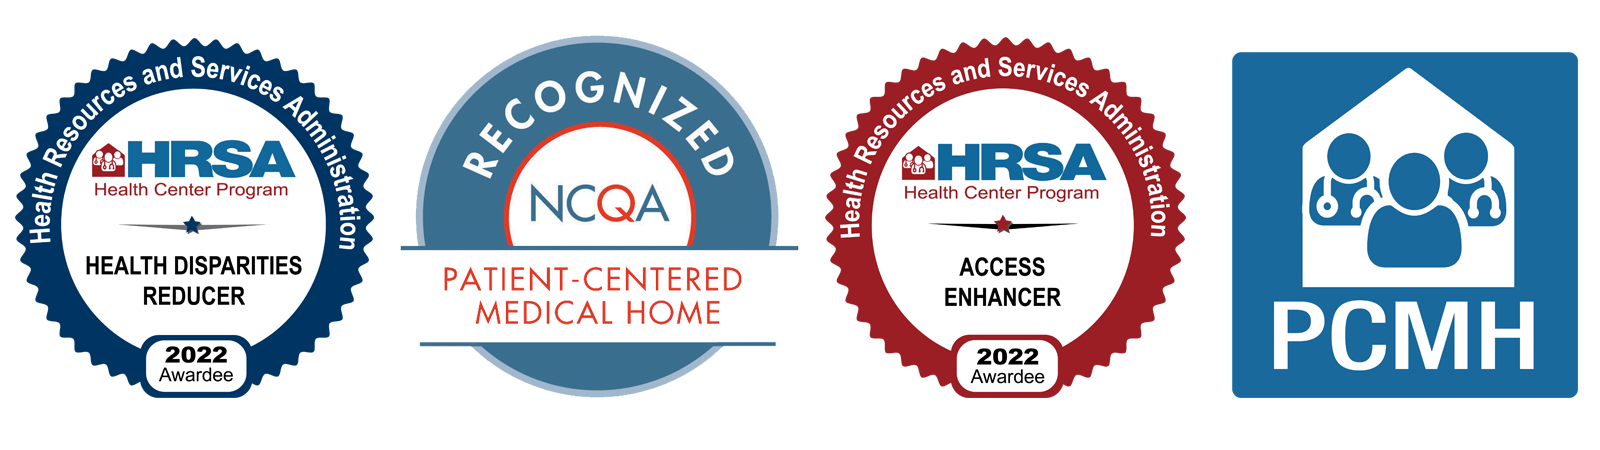 Laurel Health's Four 2022 Healthcare Quality Award Badges - Laurel Health was awarded the 2022 Access Enhancer, Patient-Centered Medical Home (PCMH), and Healthcare Disparities Reducer recognitions by HRSA and the National Committee for Quality Assurance 